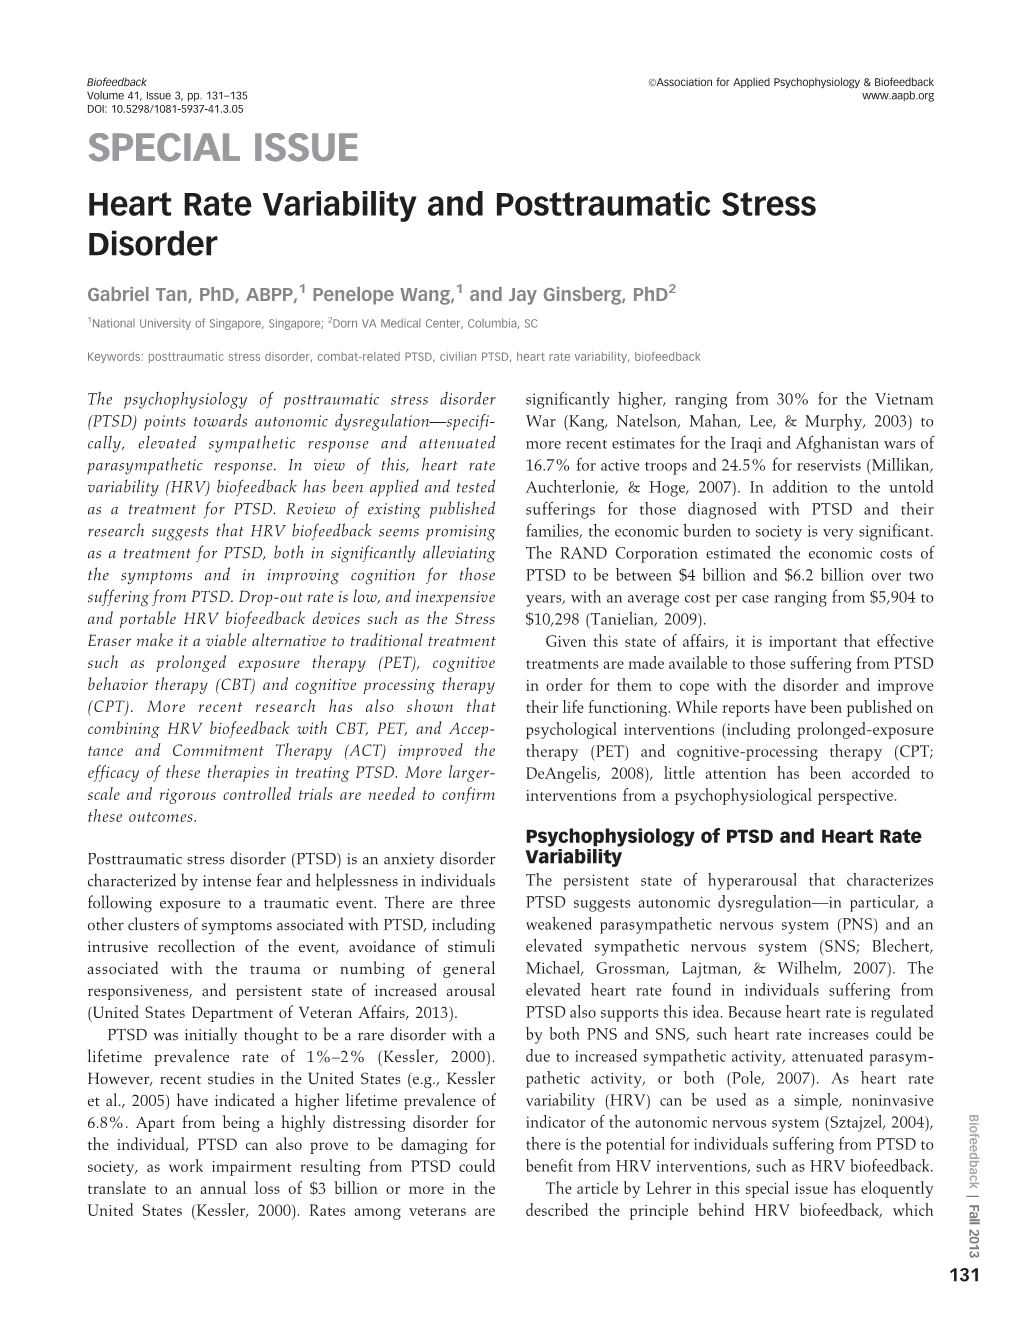 SPECIAL ISSUE Heart Rate Variability and Posttraumatic Stress Disorder